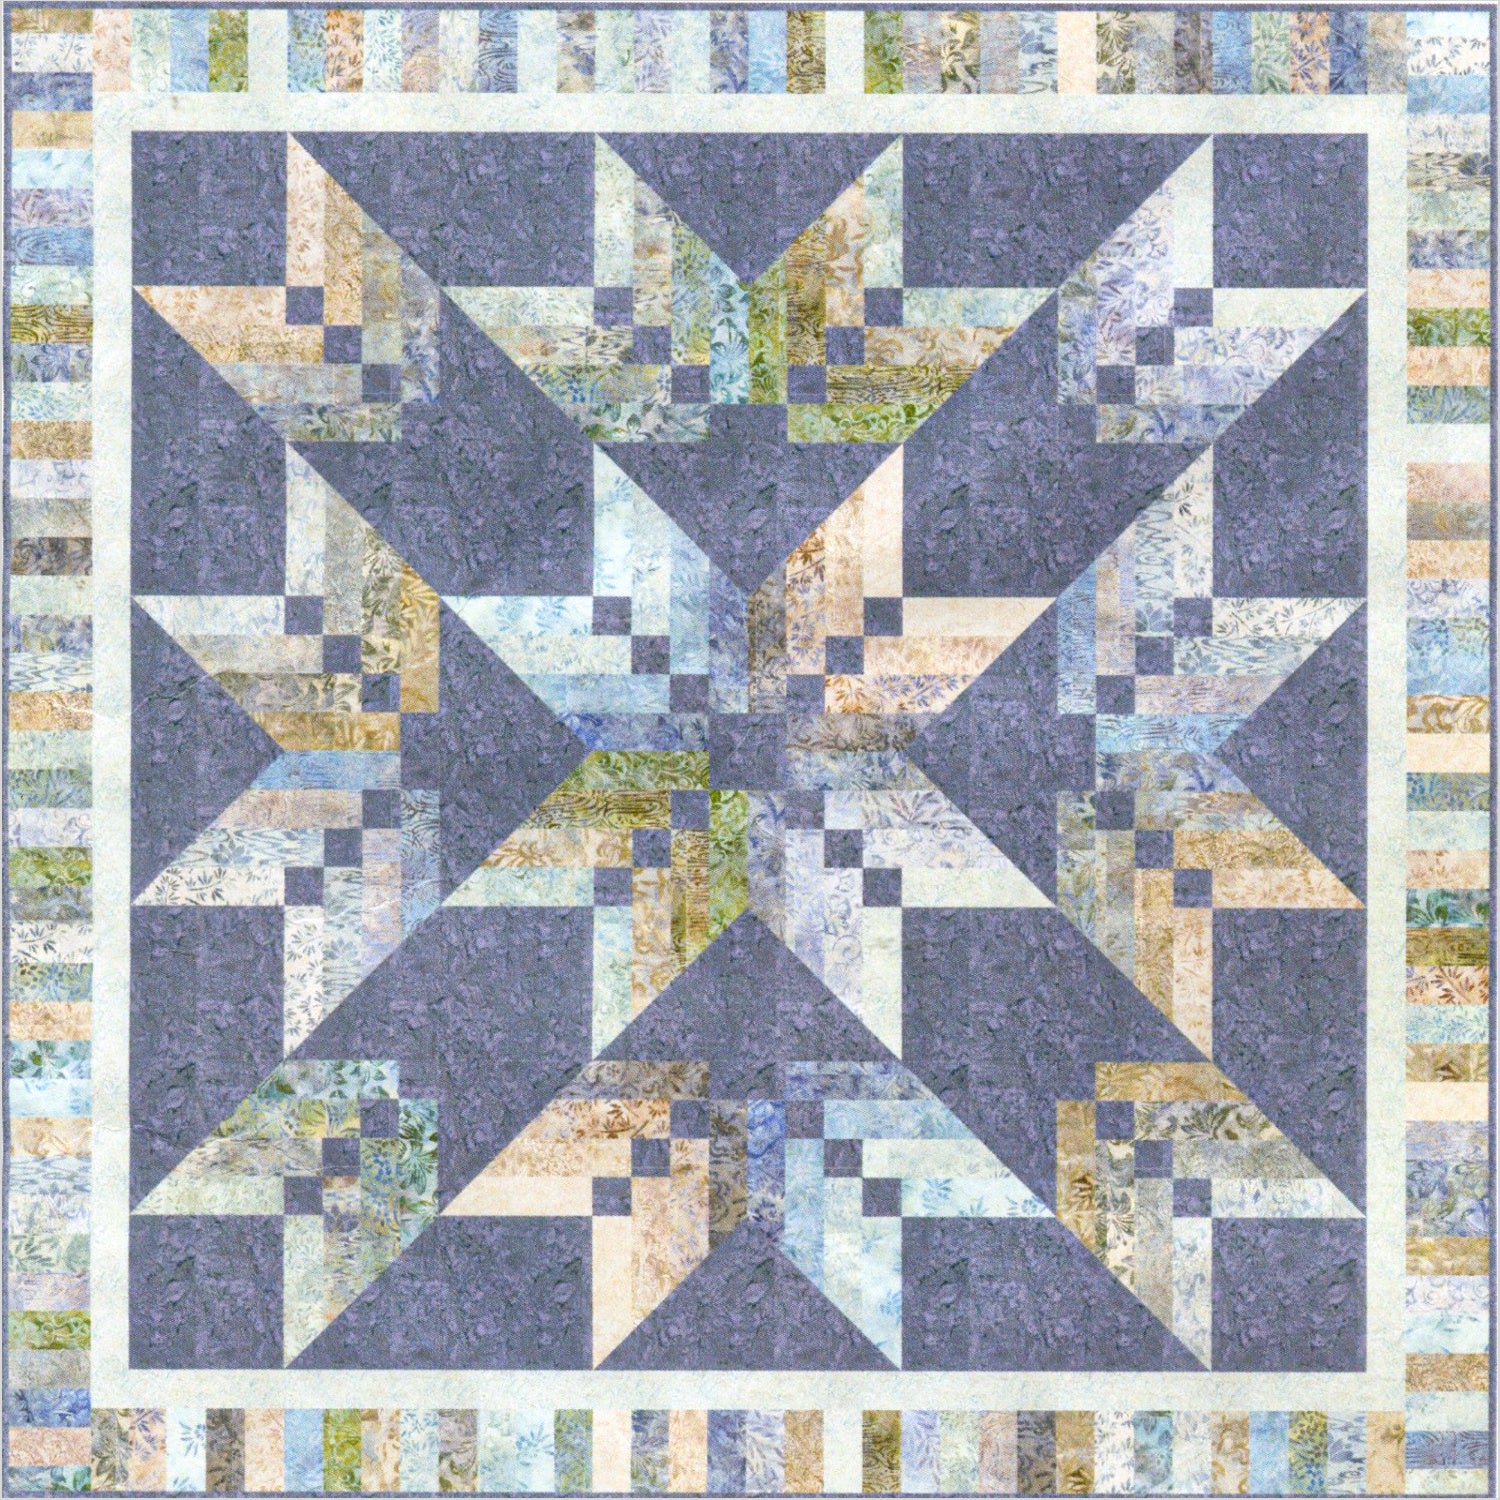 The Binding Tool Star Quilt - Quilting Tutorials